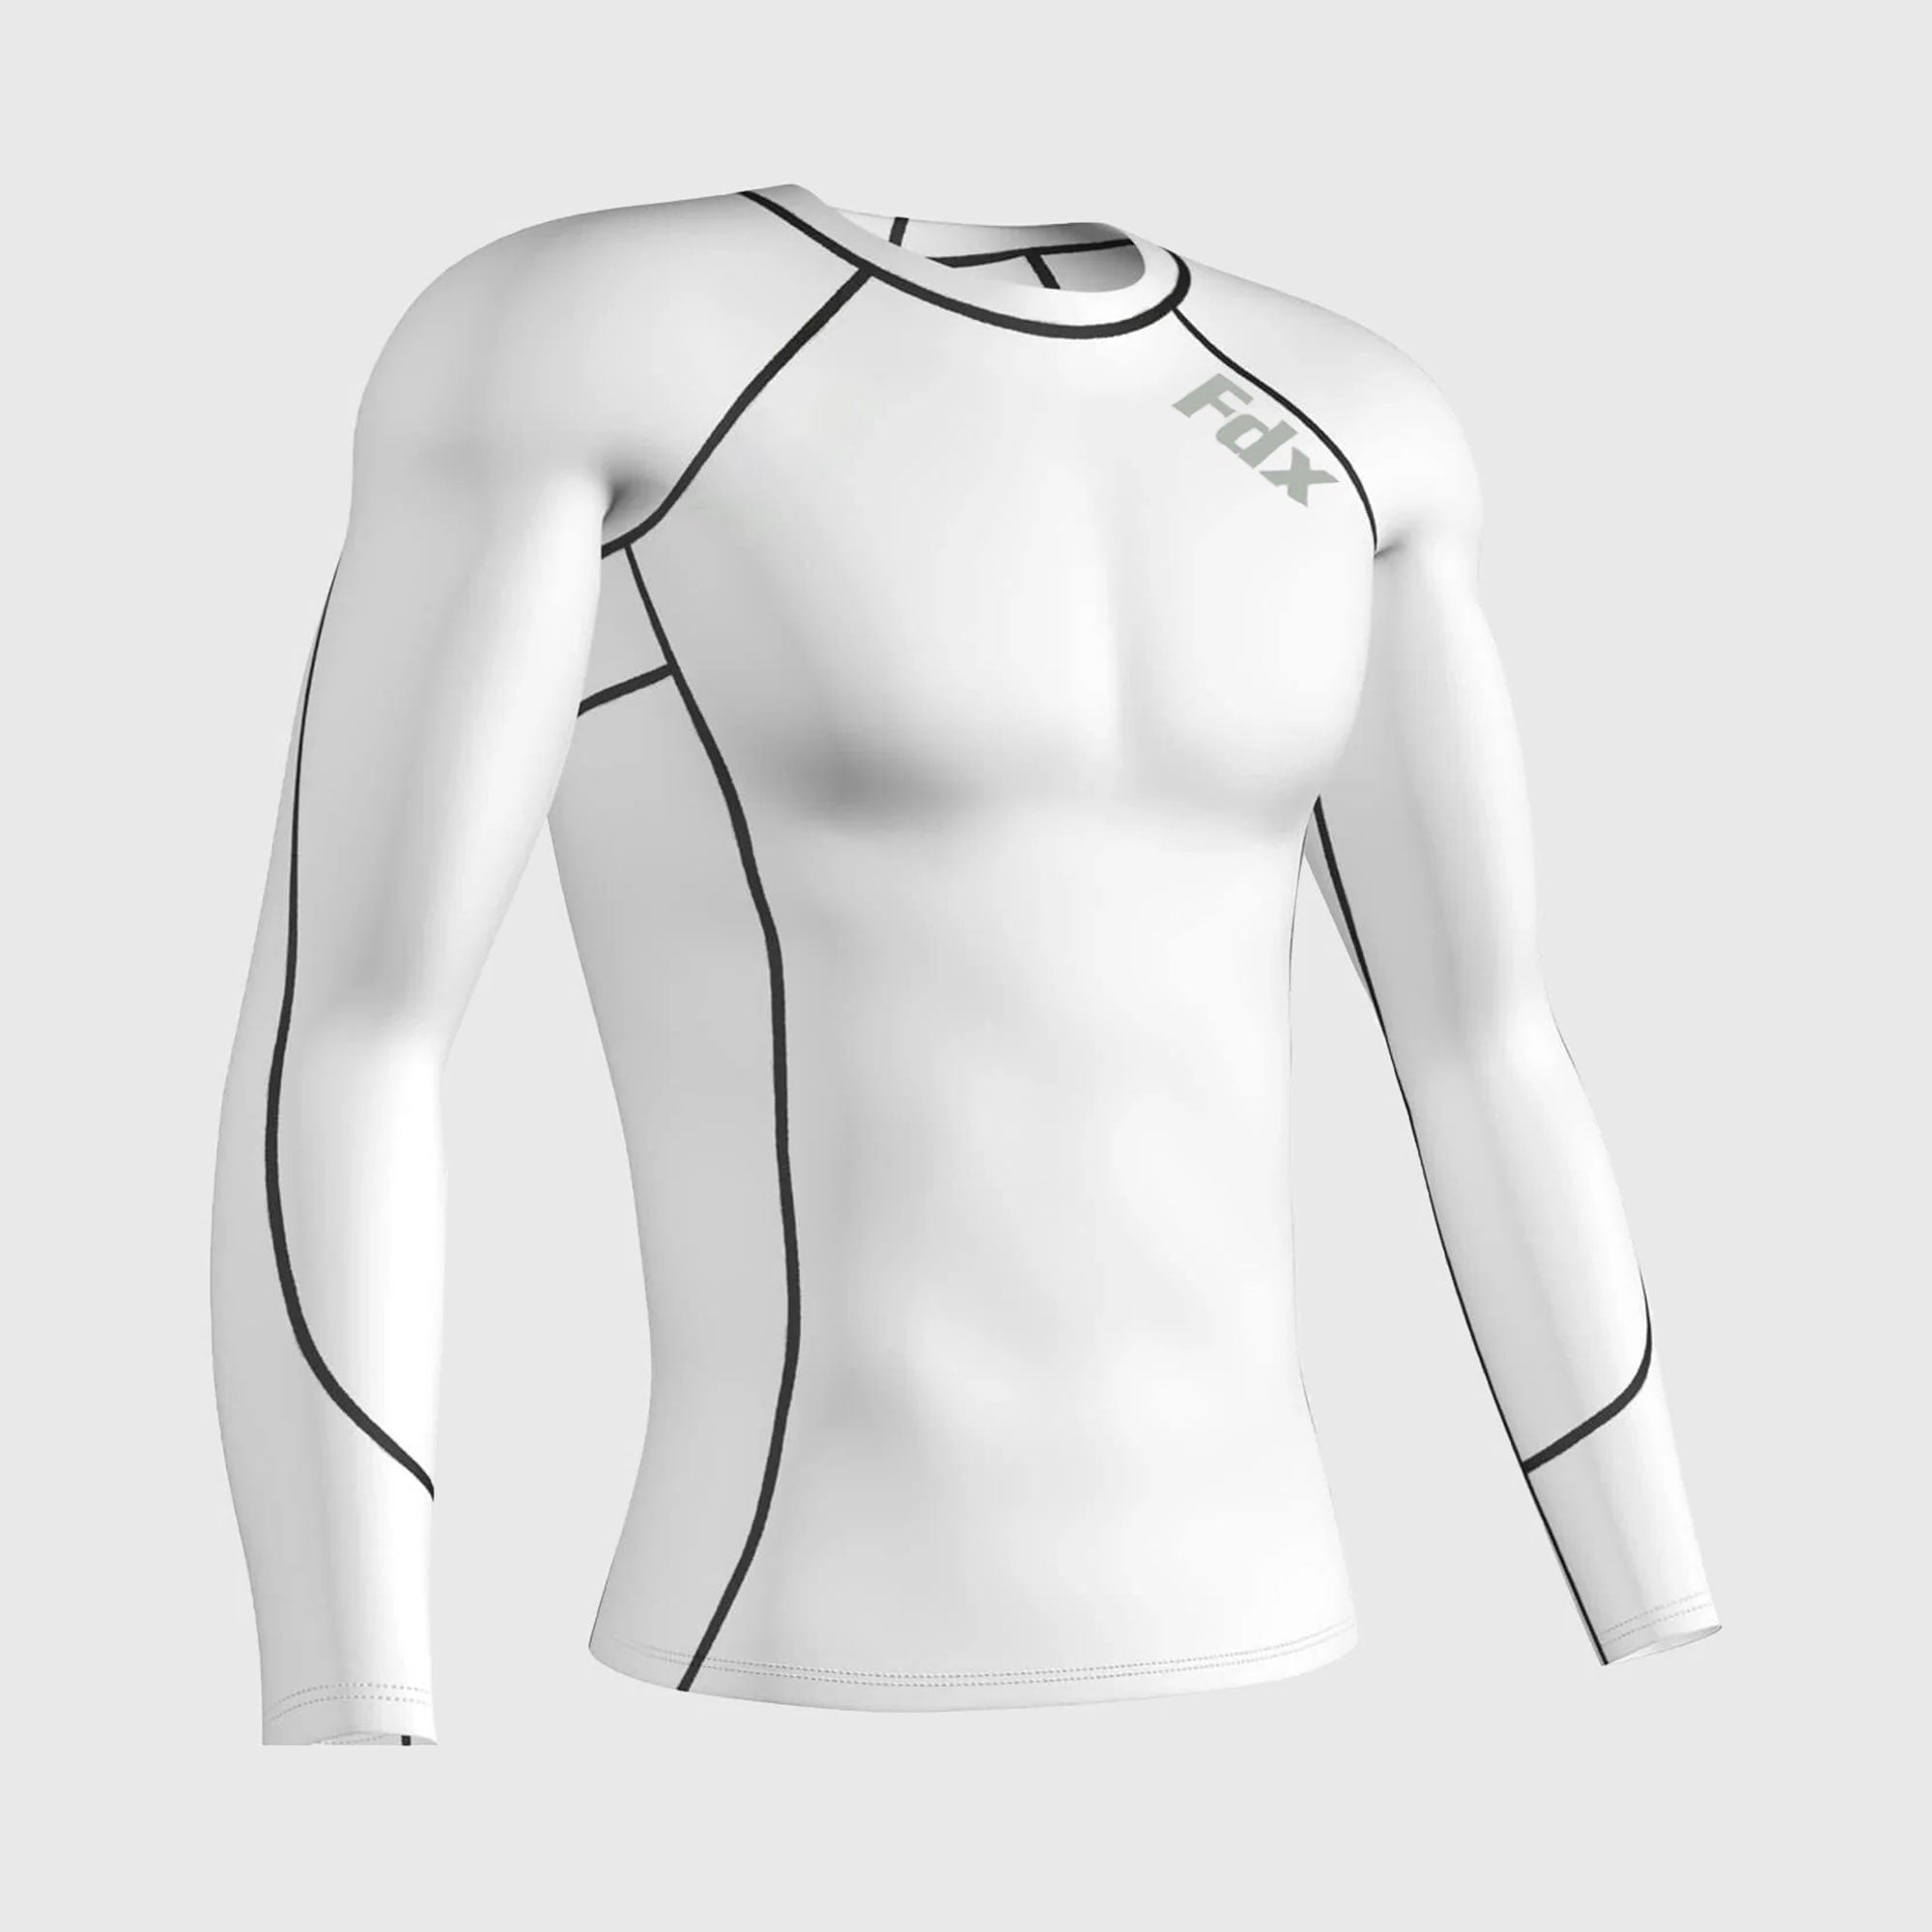 Fdx Mens White Long Sleeve Compression Top Running Gym Workout Wear Rash Guard Stretchable Breathable - Cosmic